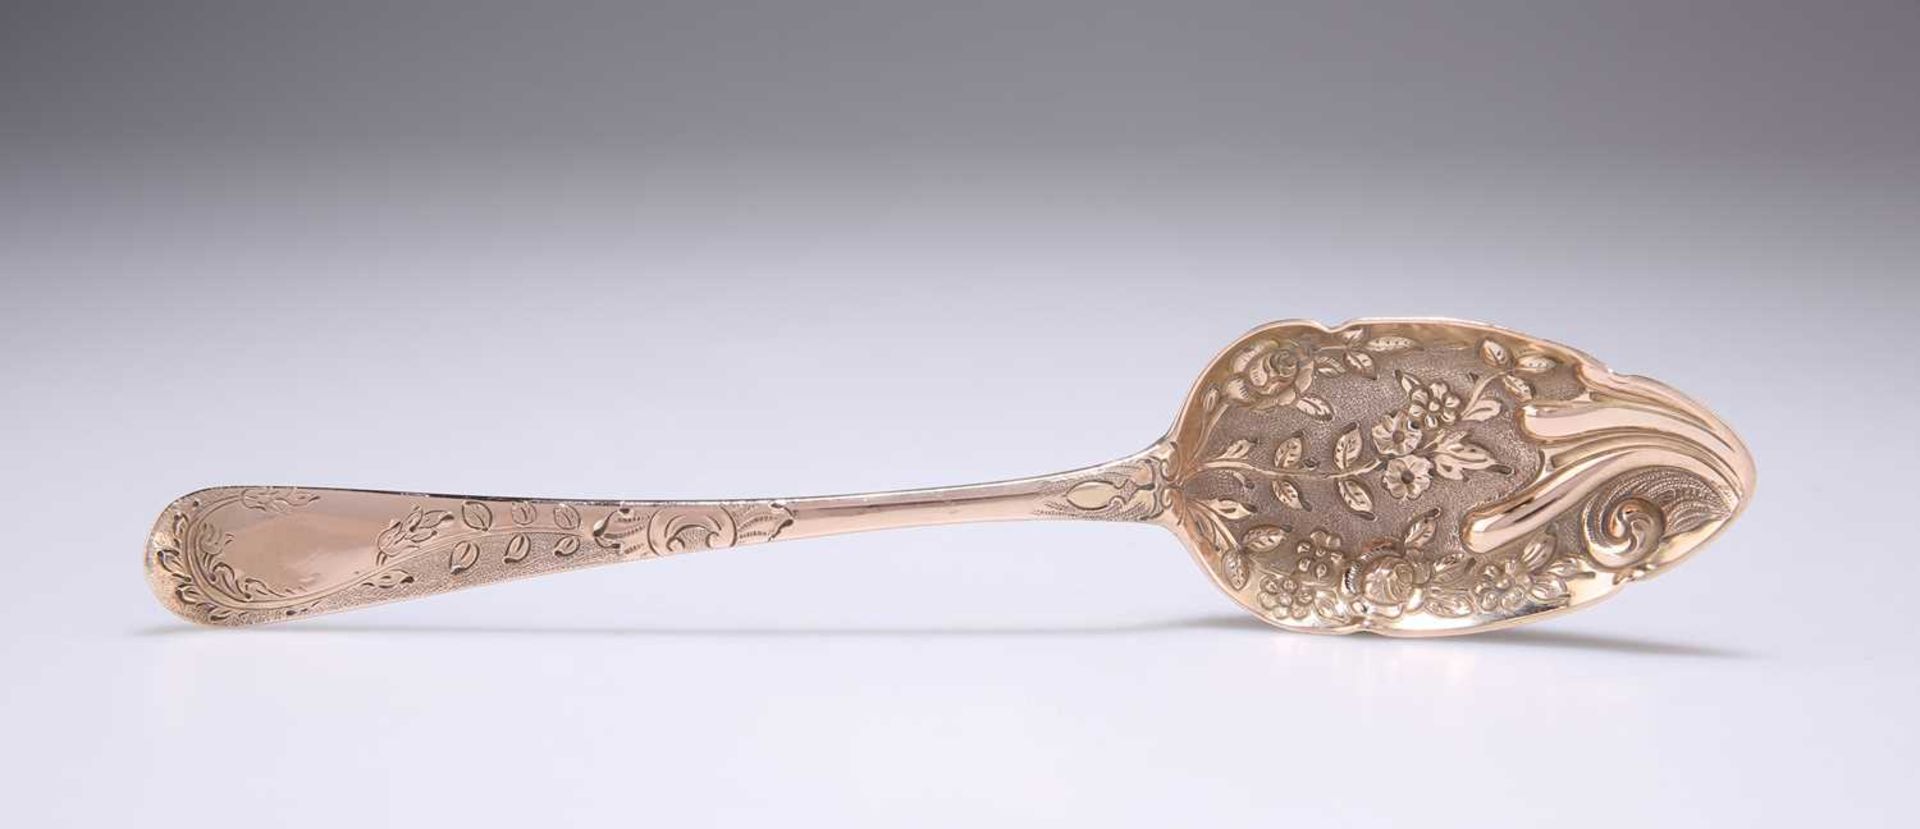 A PAIR OF GEORGE III GILT-WASHED SILVER BERRY SPOONS - Image 2 of 3